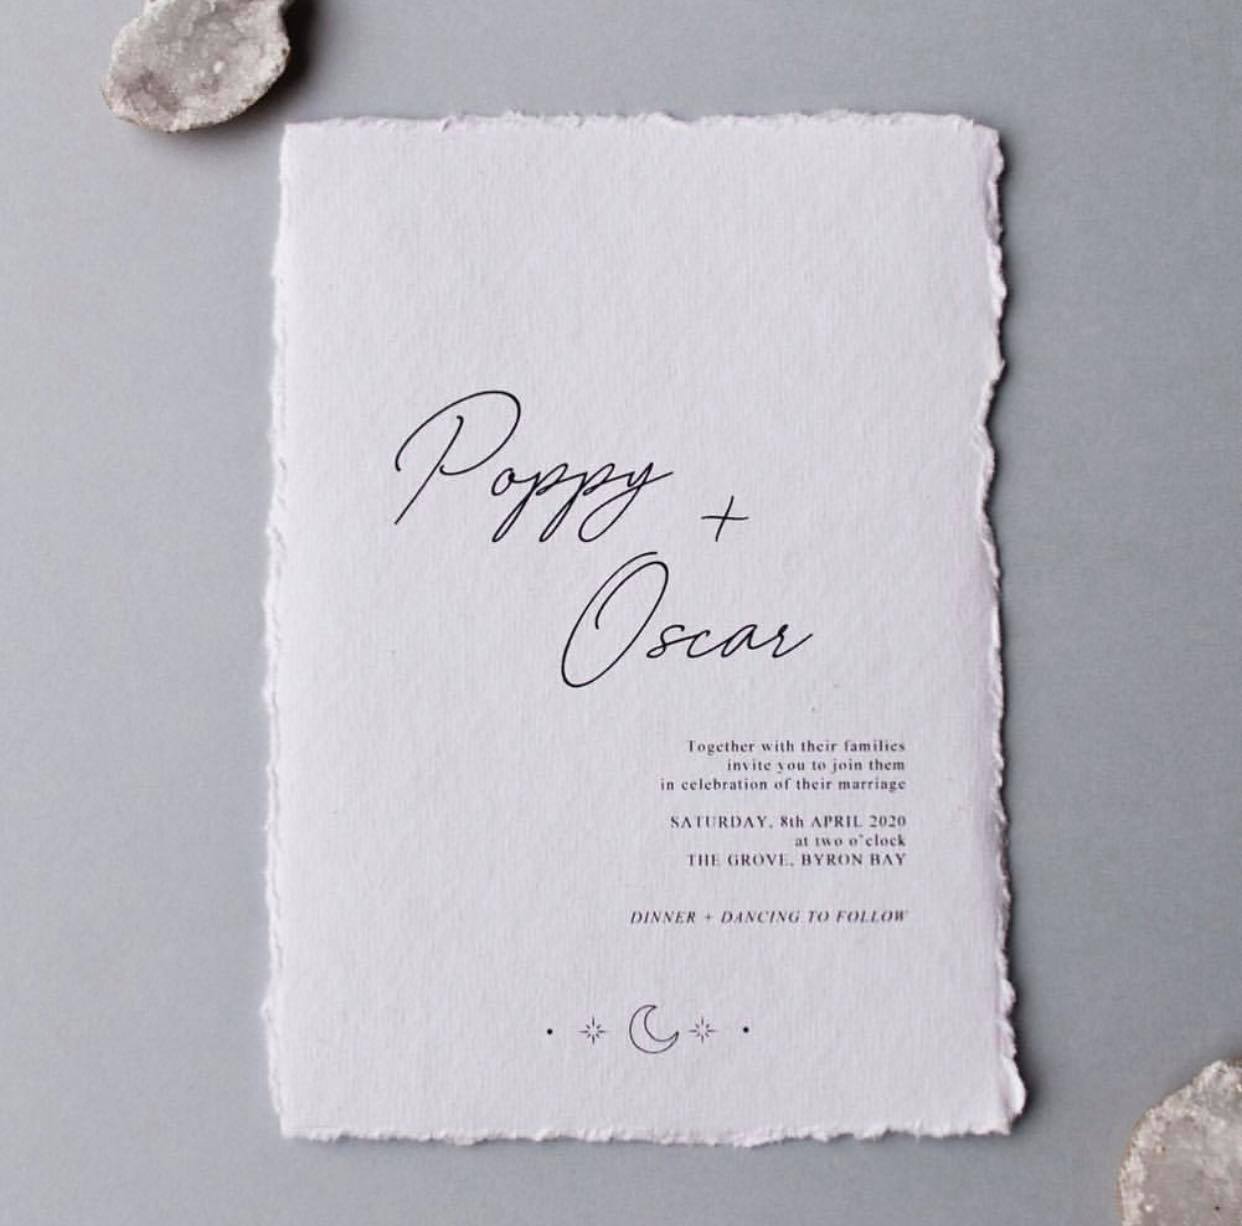 recycled paper wedding invitations melbourne stationery designer